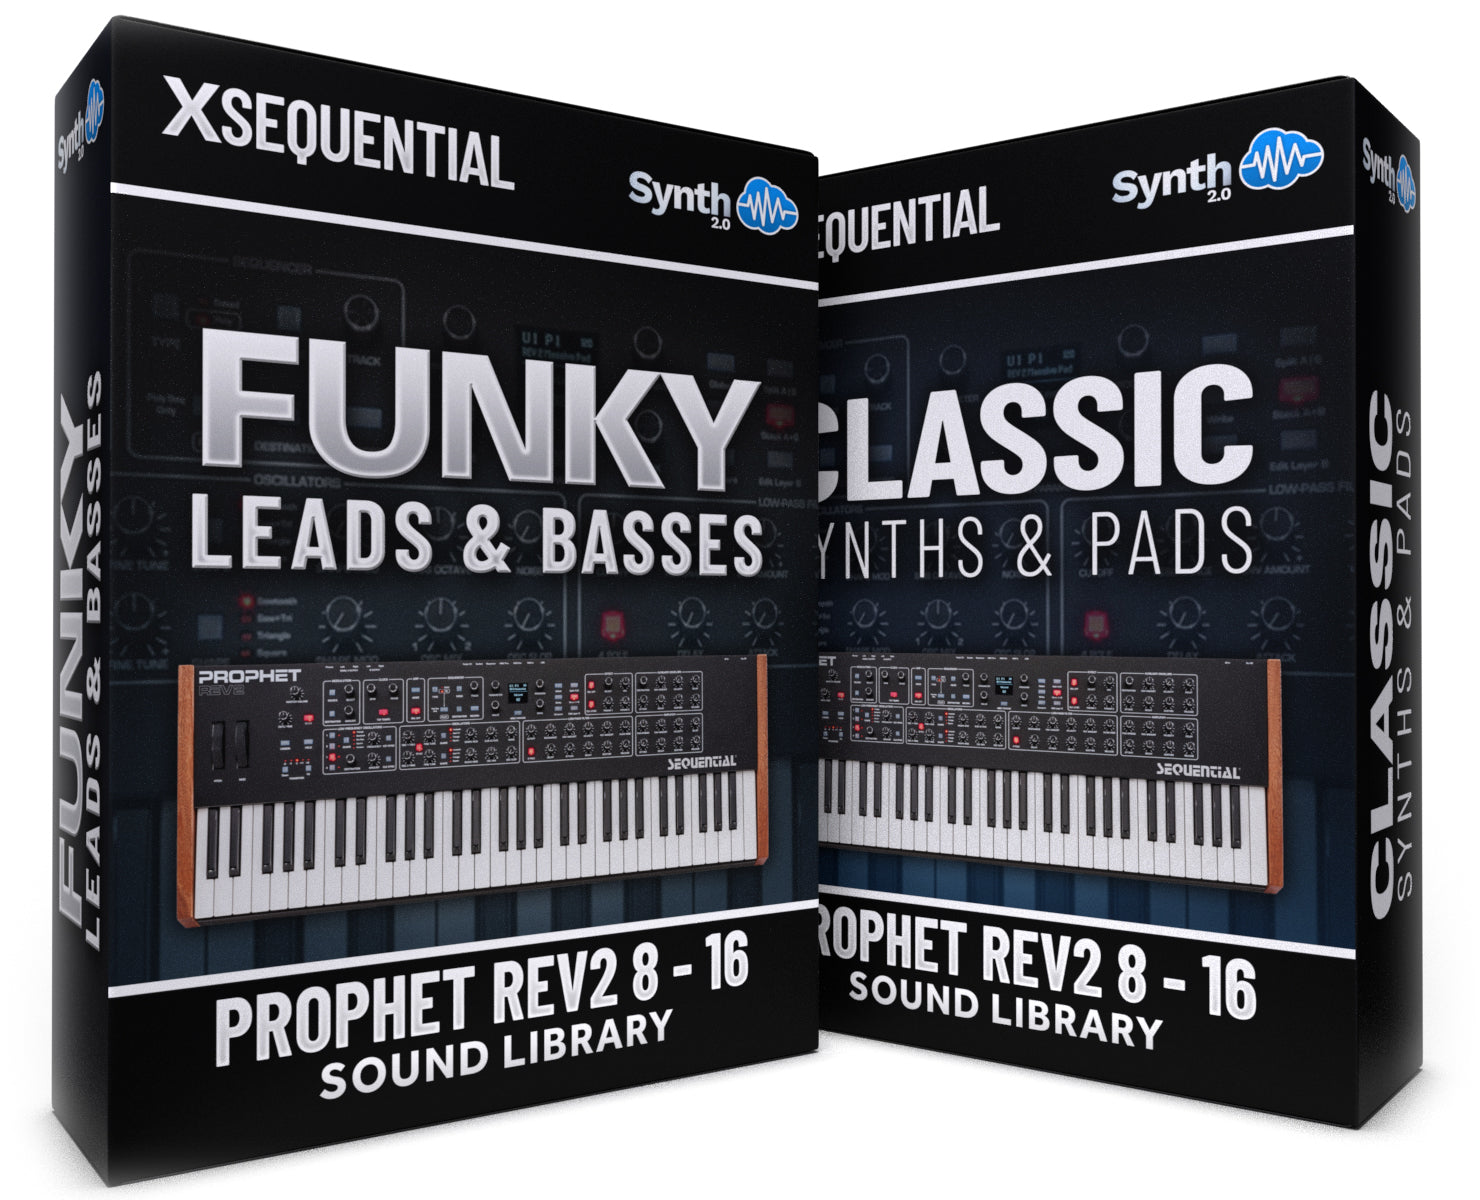 APL020 - ( Bundle ) - Funky Leads & Basses + Classic Synths & Pads - Sequential Prophet Rev2 ( 8 - 16 voices )